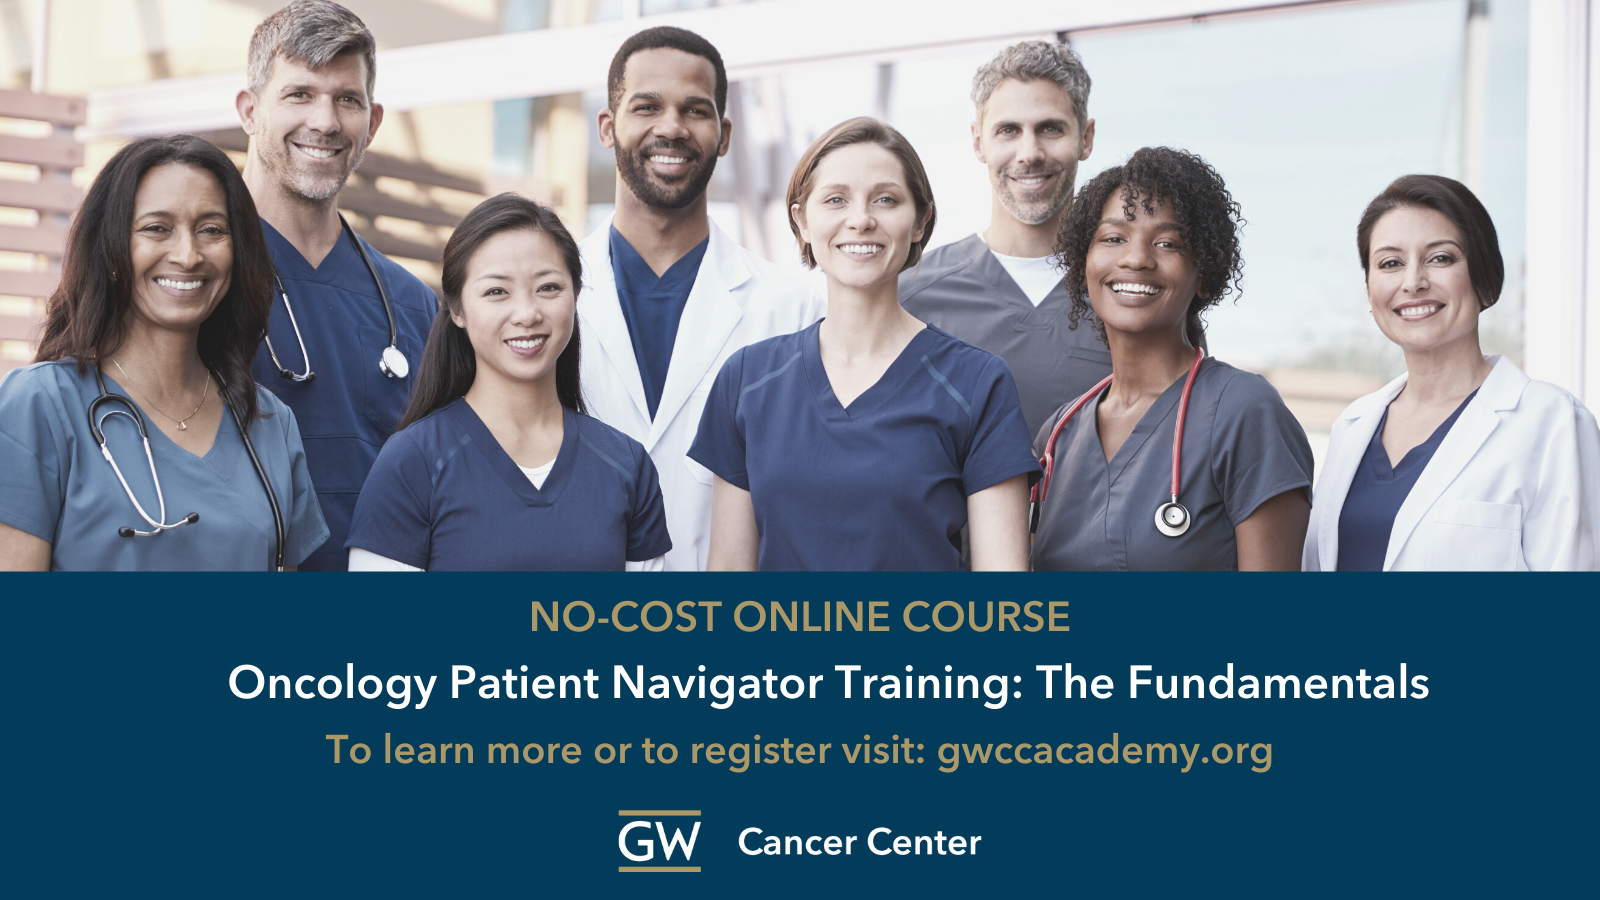 Image of healthcare professionals of various backgrounds. Text below reads "Oncology Patient Navigator Training: The Fundamentals"